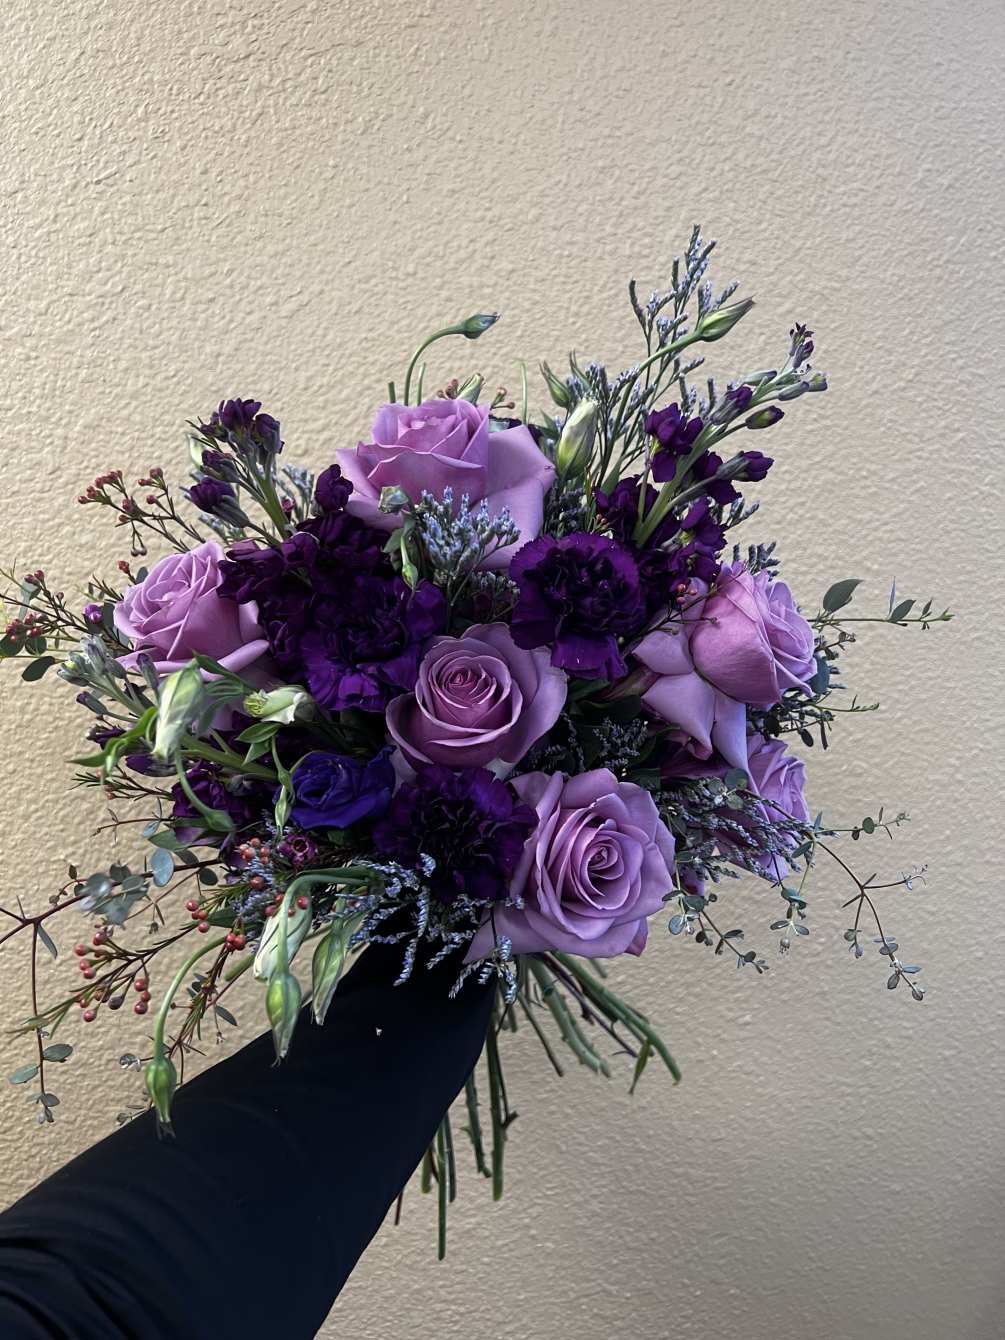 Have a purple lover in your life? This bouquet is sure to